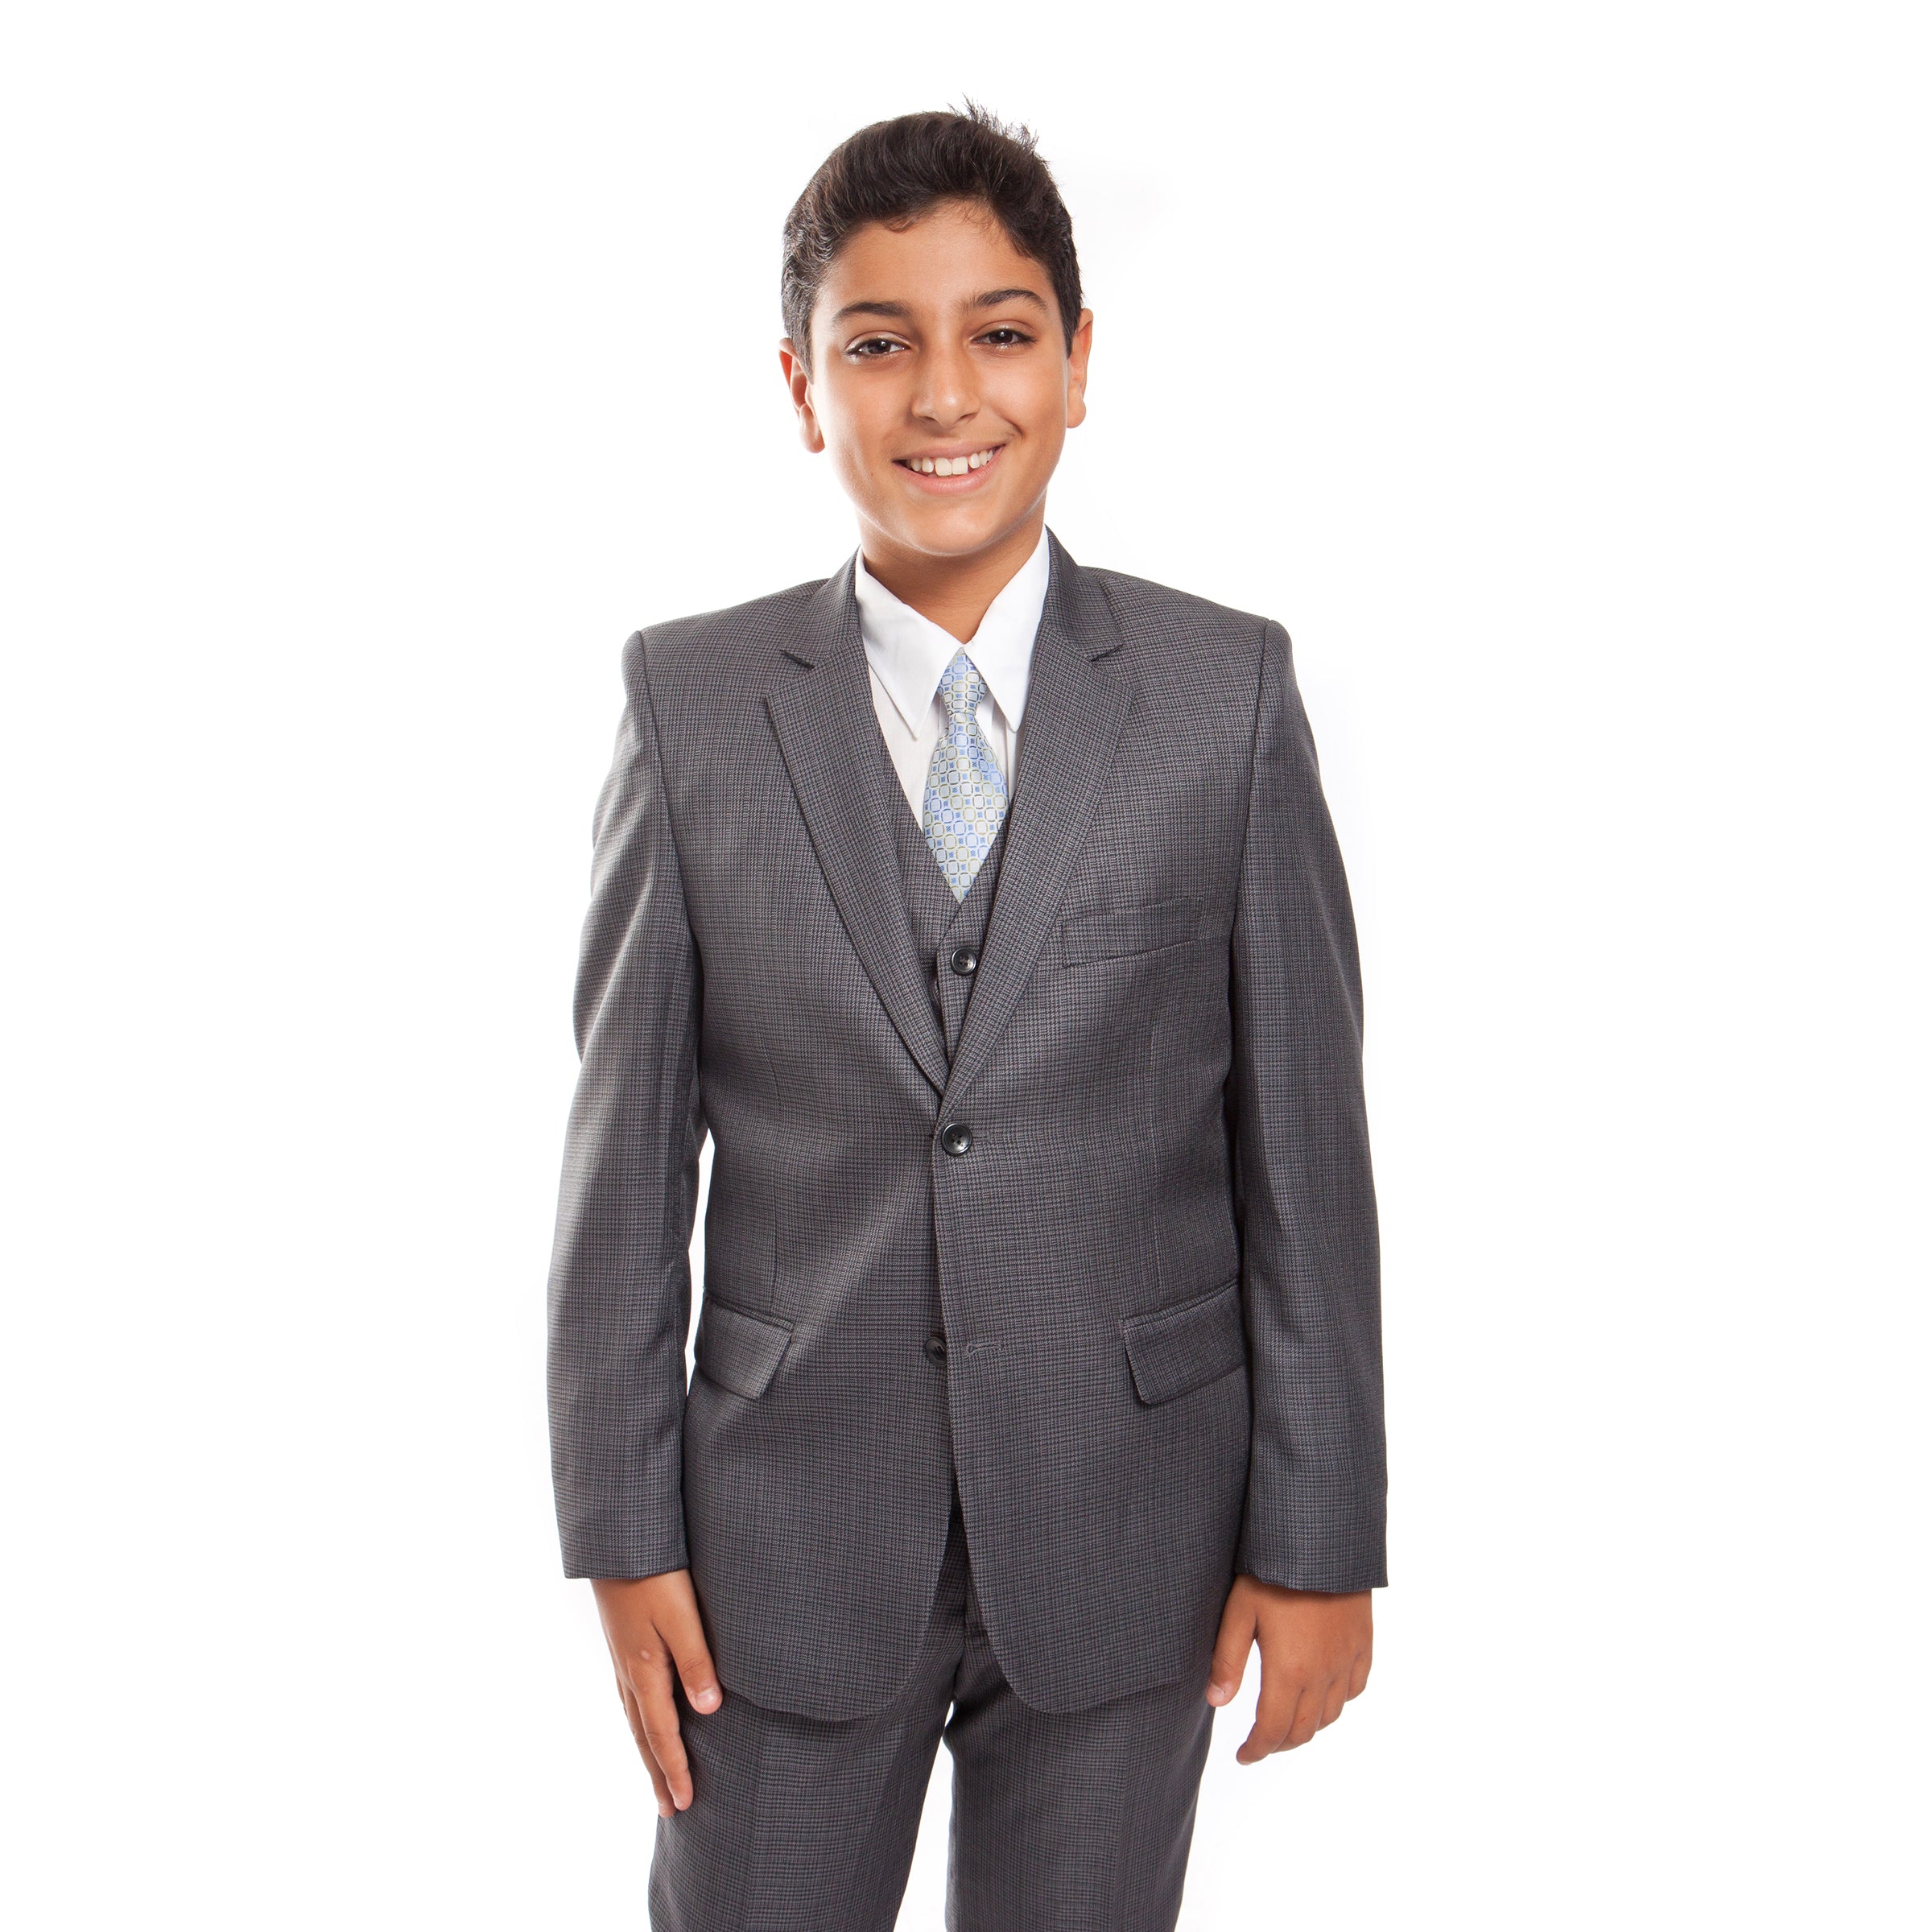 Blue Suit For Boys Formal Suits For All Ocassions B362-02